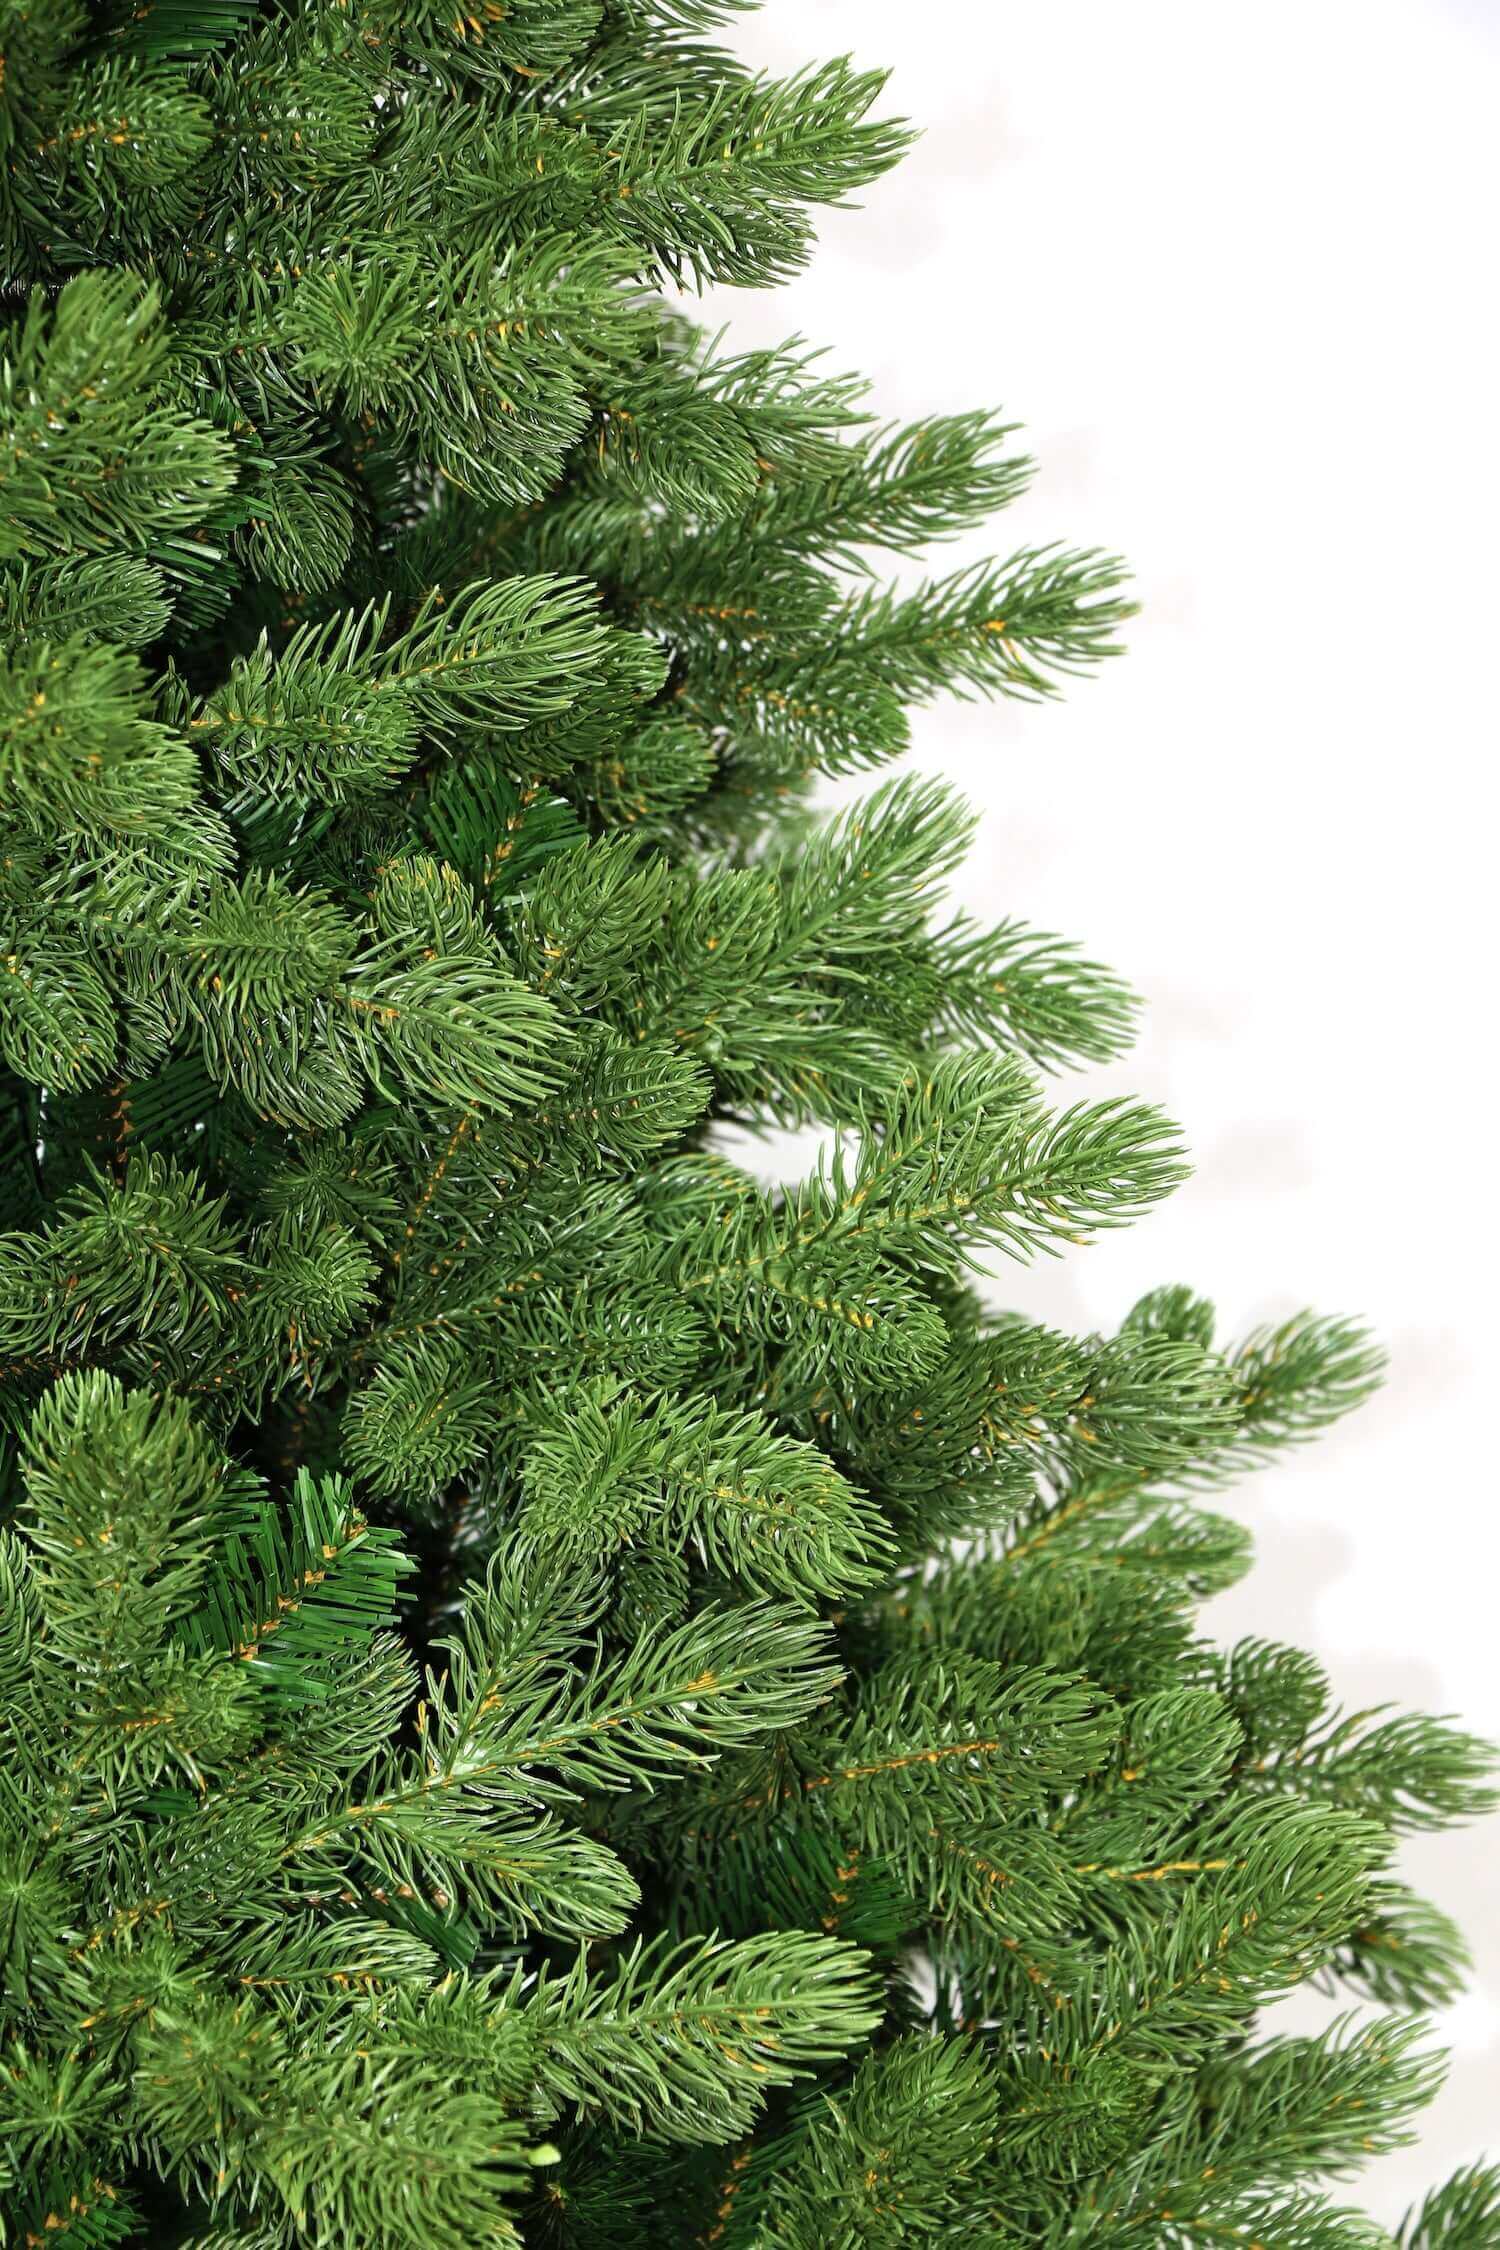 King of Christmas 6.5' Cypress Spruce Artificial Christmas Tree Unlit